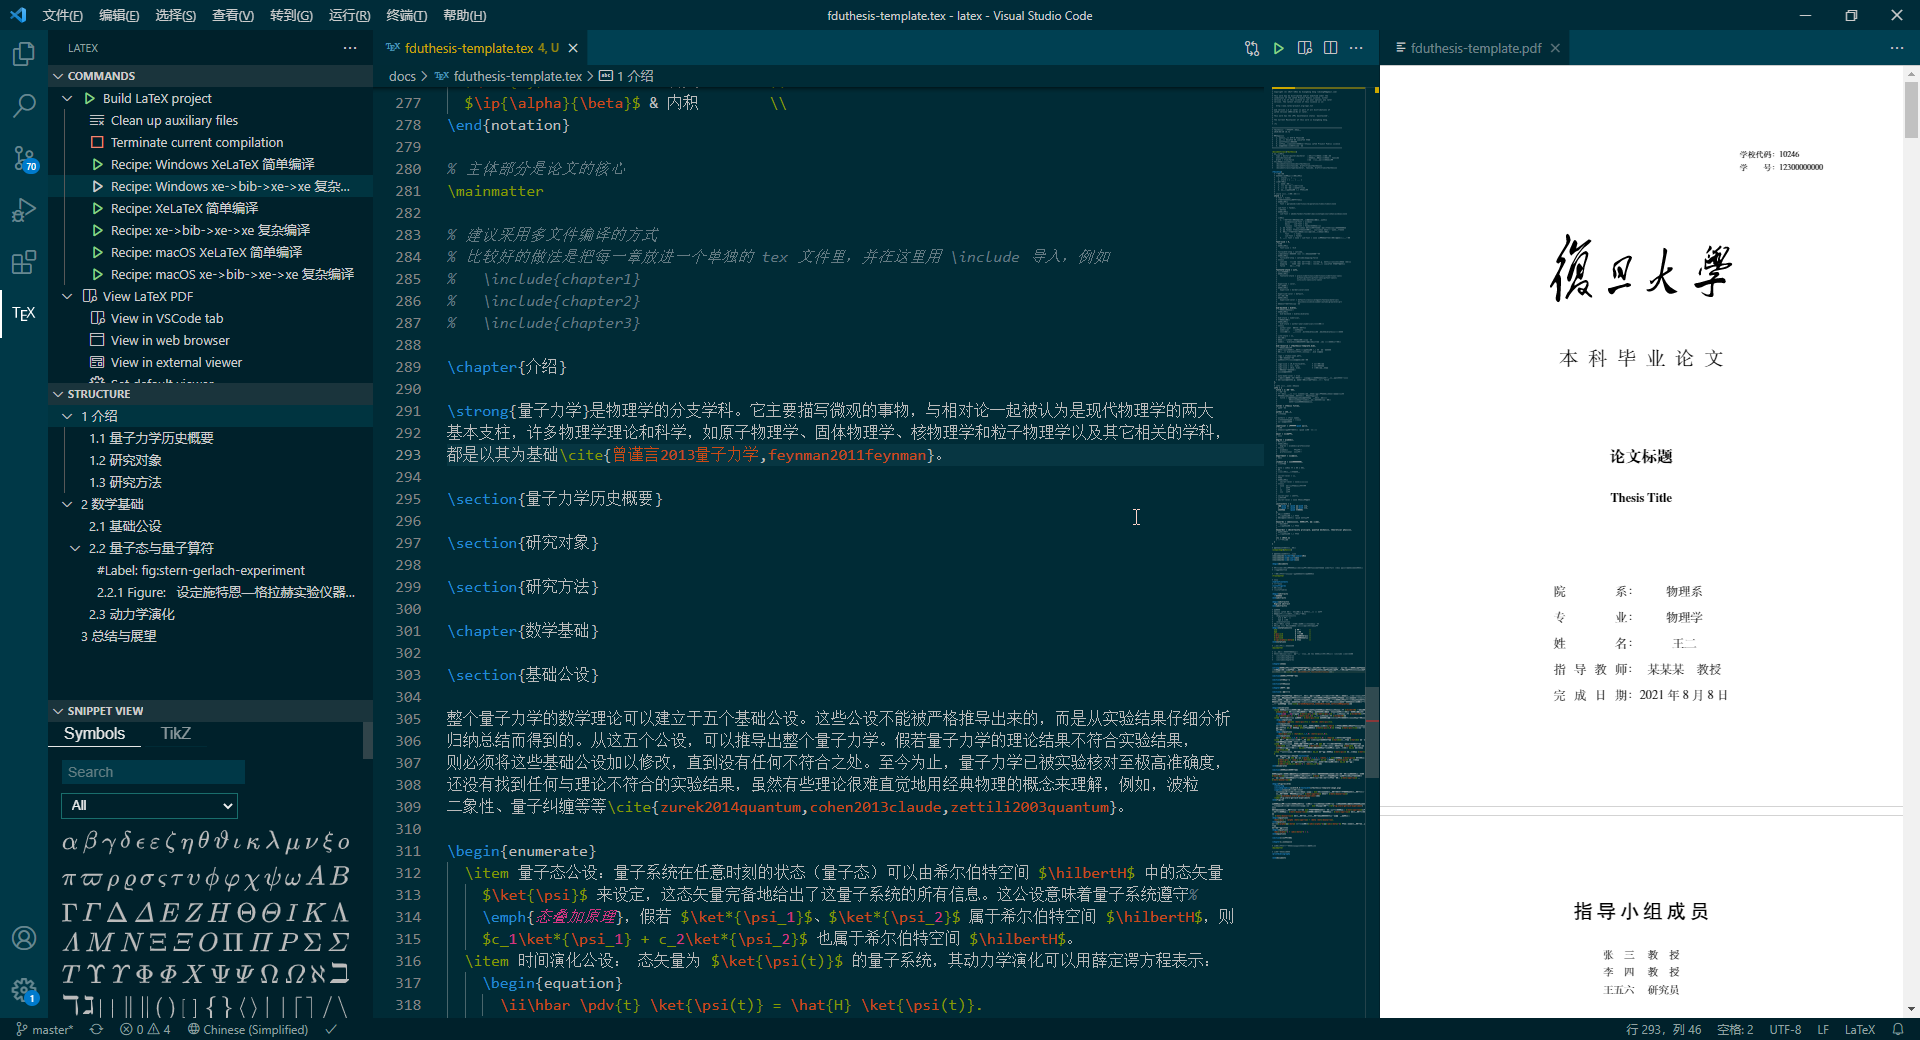 vscode-latex-preview.png